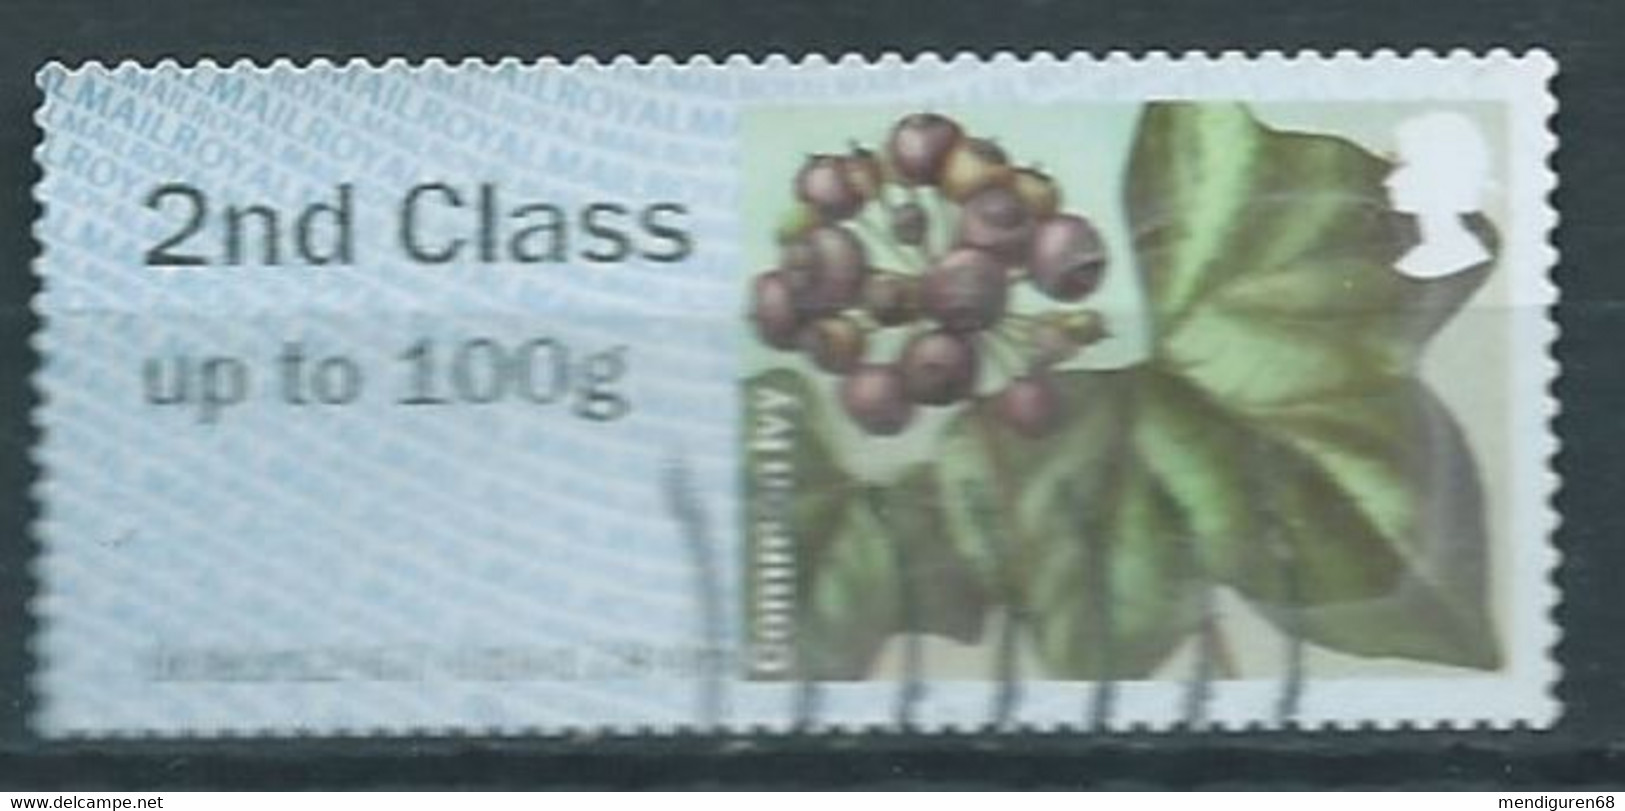 GROSBRITANNIEN GRANDE BRETAGNE GB 2014 POST&GO WINTERFLOWERS: COMMON IVY 2ND CLASS Up To 100g SG FS109 - Post & Go Stamps